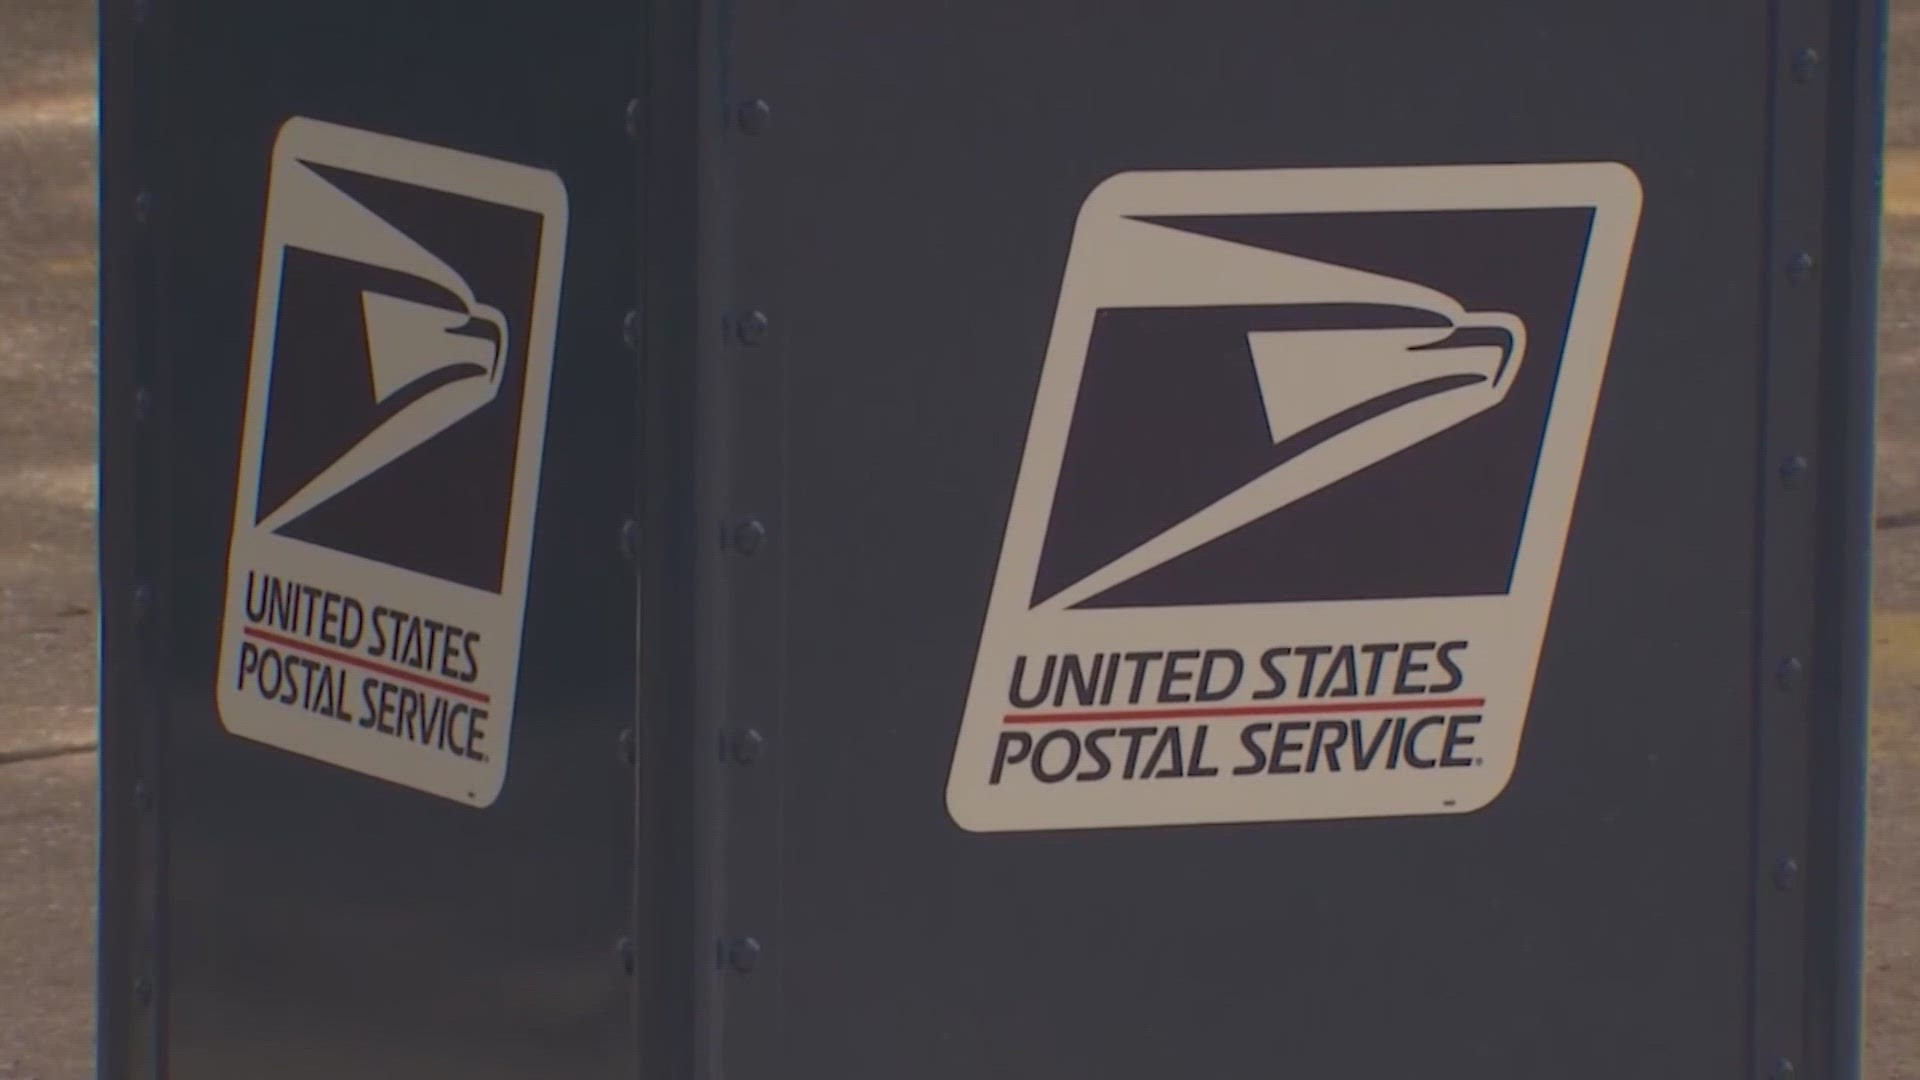 In a Senate hearing Tuesday, Postmaster General Louis DeJoy is set to answer questions from the nation’s top lawmakers about the postal service.